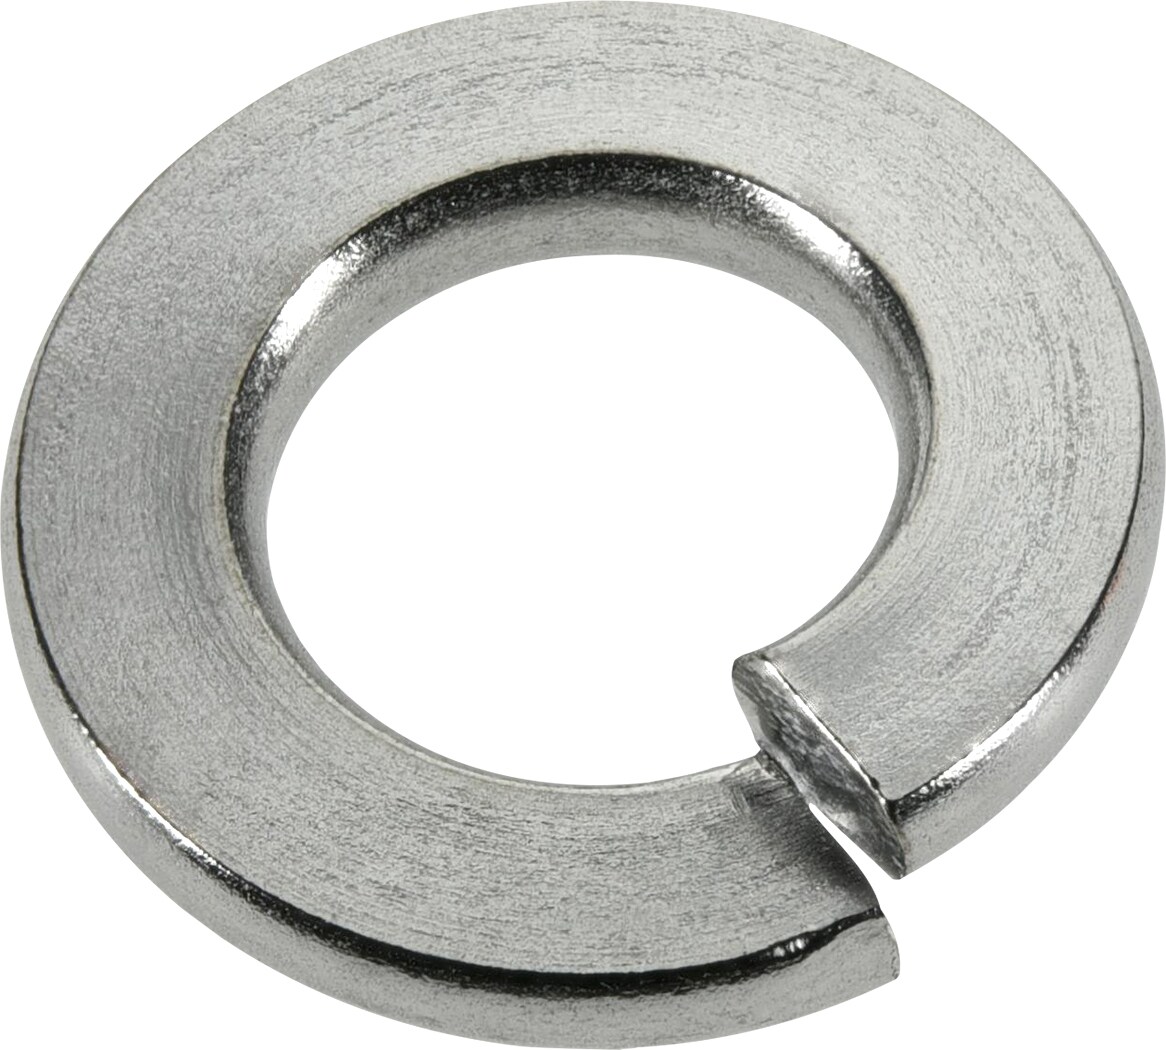 Hillman 300018 Zinc-Plated Steel Split Lock Washer 1/4 Dia for Nuts/Bolts in 